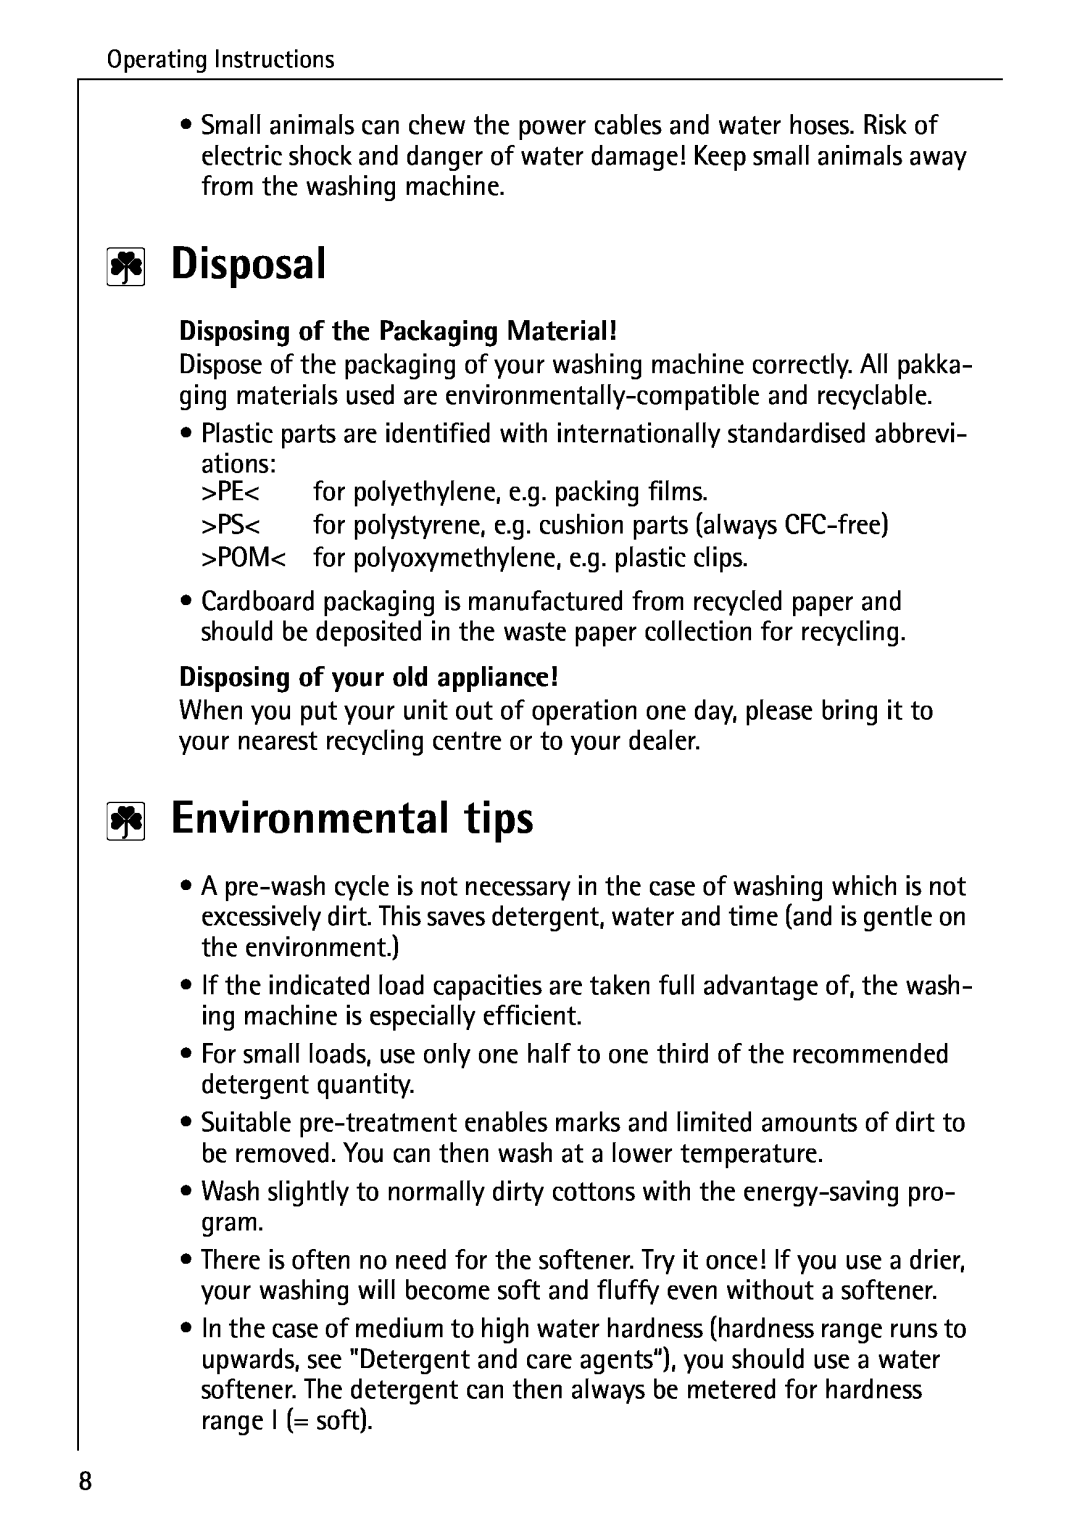 AEG 72640 manual Disposal, Environmental tips, Disposing of the Packaging Material, Disposing of your old appliance 